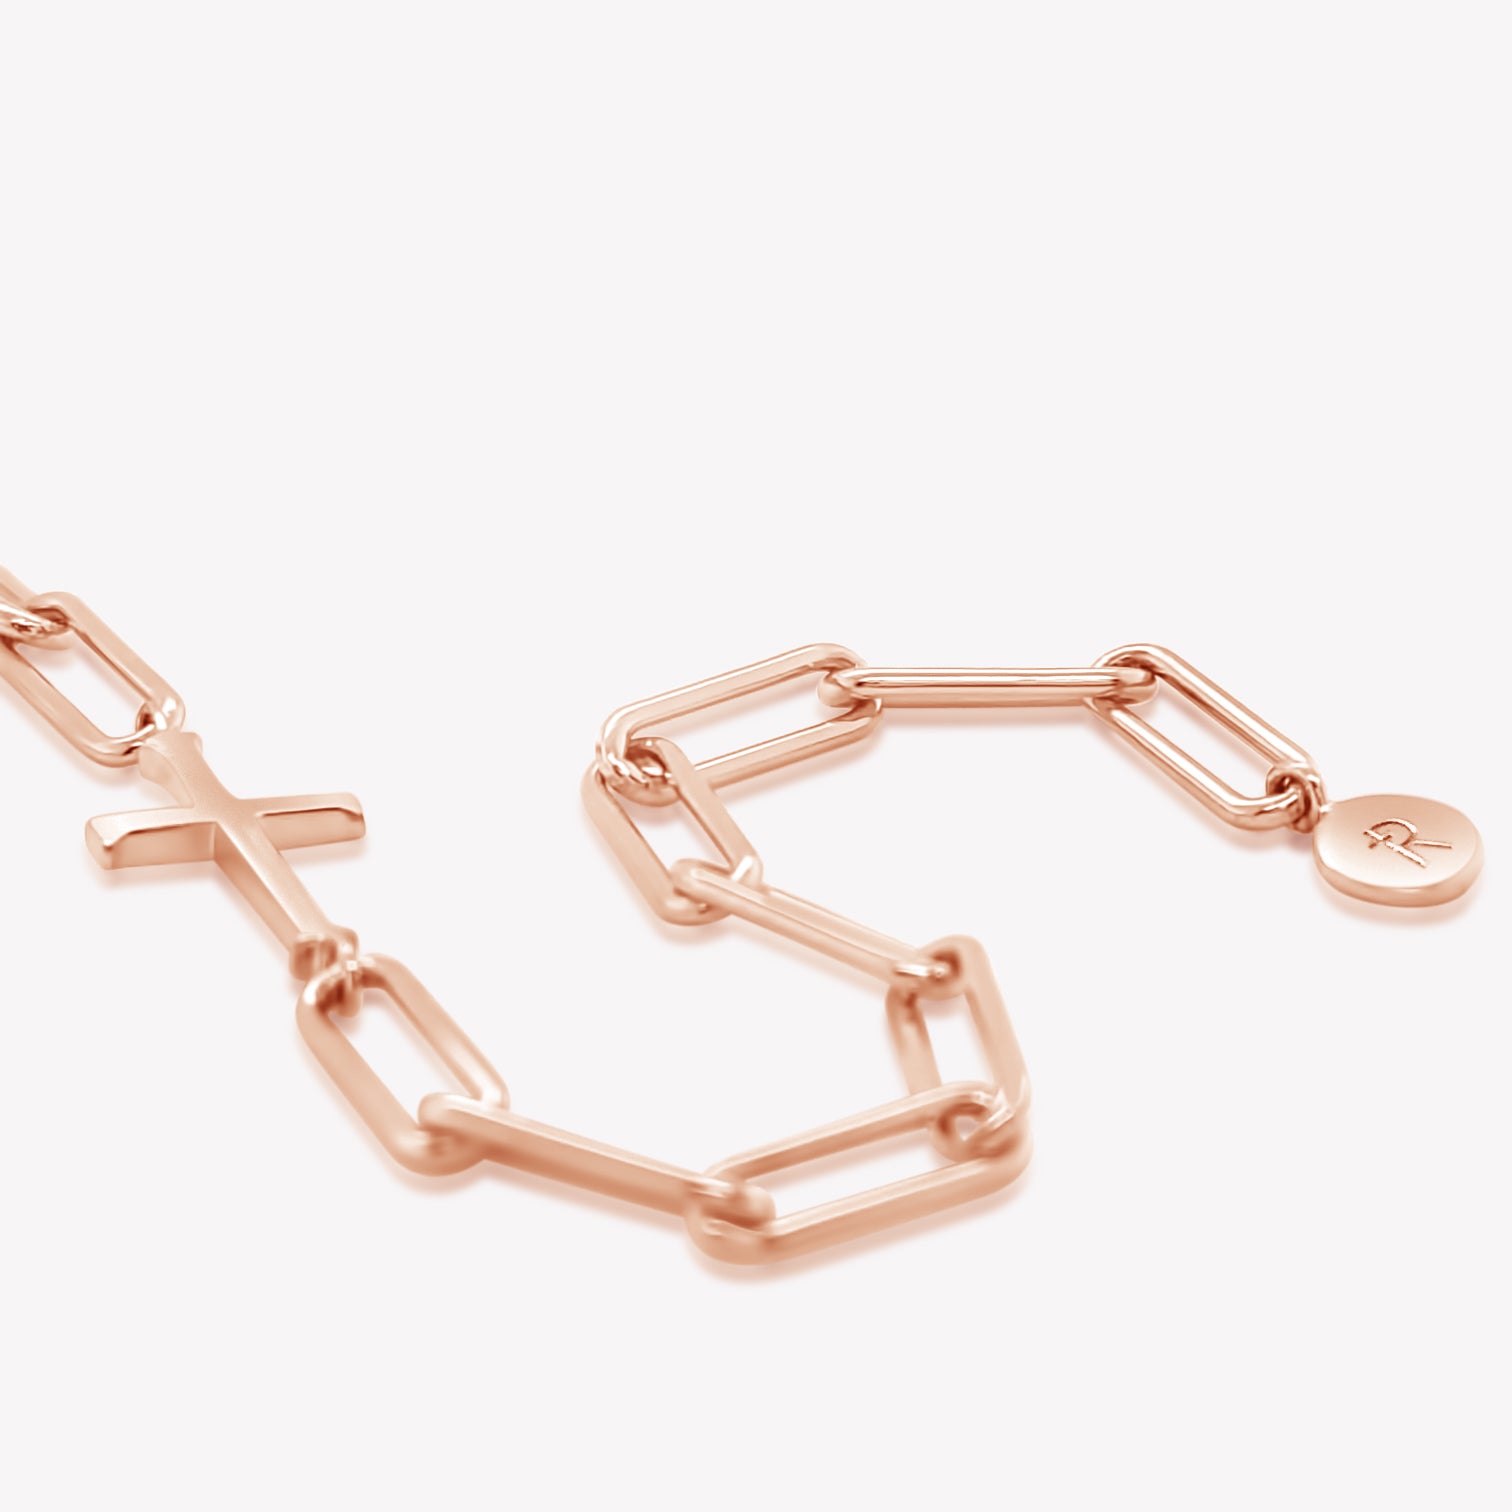 Rizen Jewelry Chain Breaker bracelet in 18kt rose gold.  Elegant Cross Pendant breaks up the contemporary paper clip link chain with circular Rizen tag on last link of chain.